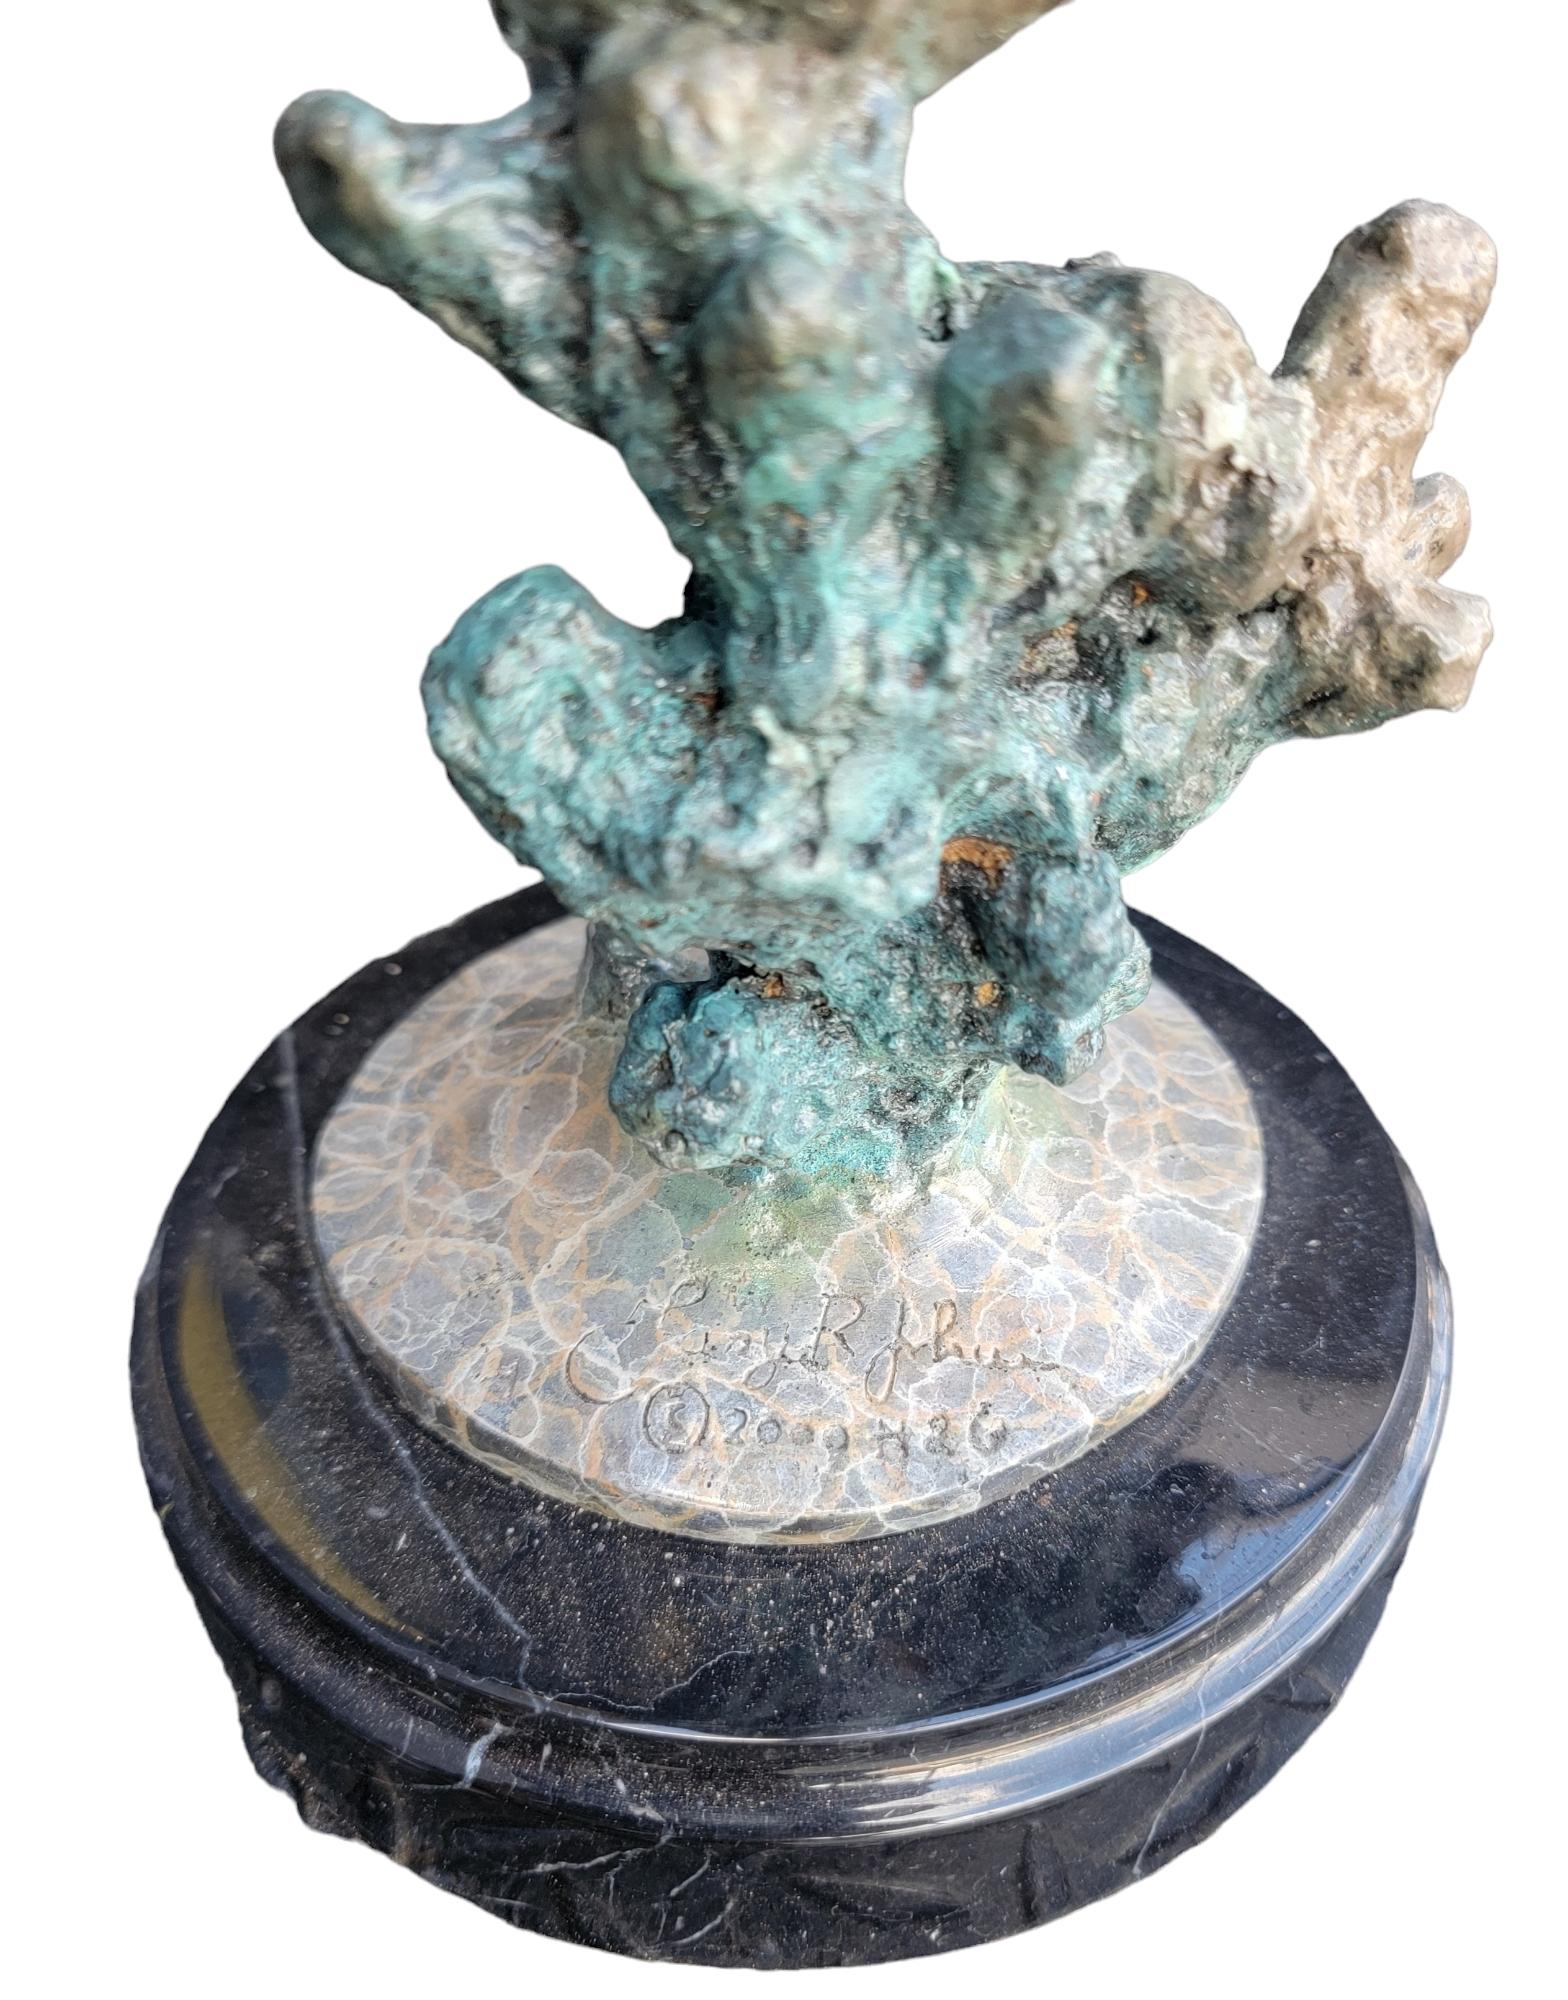 Signed Patinaed Whale With Marble Base. Beautiful blue patina. Aged color pallet with wear only time can do. Bronze and marble come together to make this Sculpture feel as if the viewer is watching the whale dive deeper into the abyss. Great look.